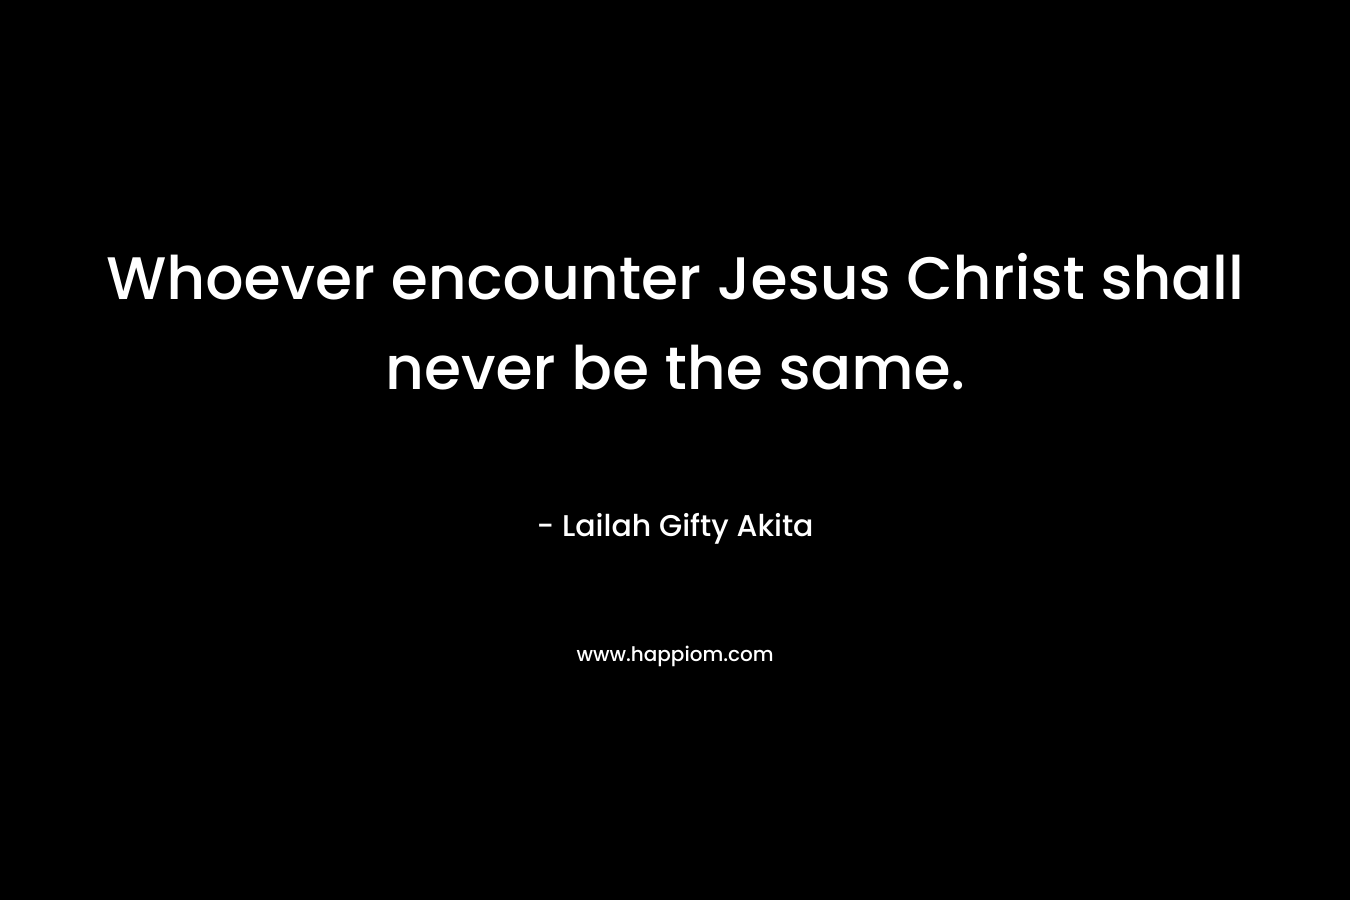 Whoever encounter Jesus Christ shall never be the same.